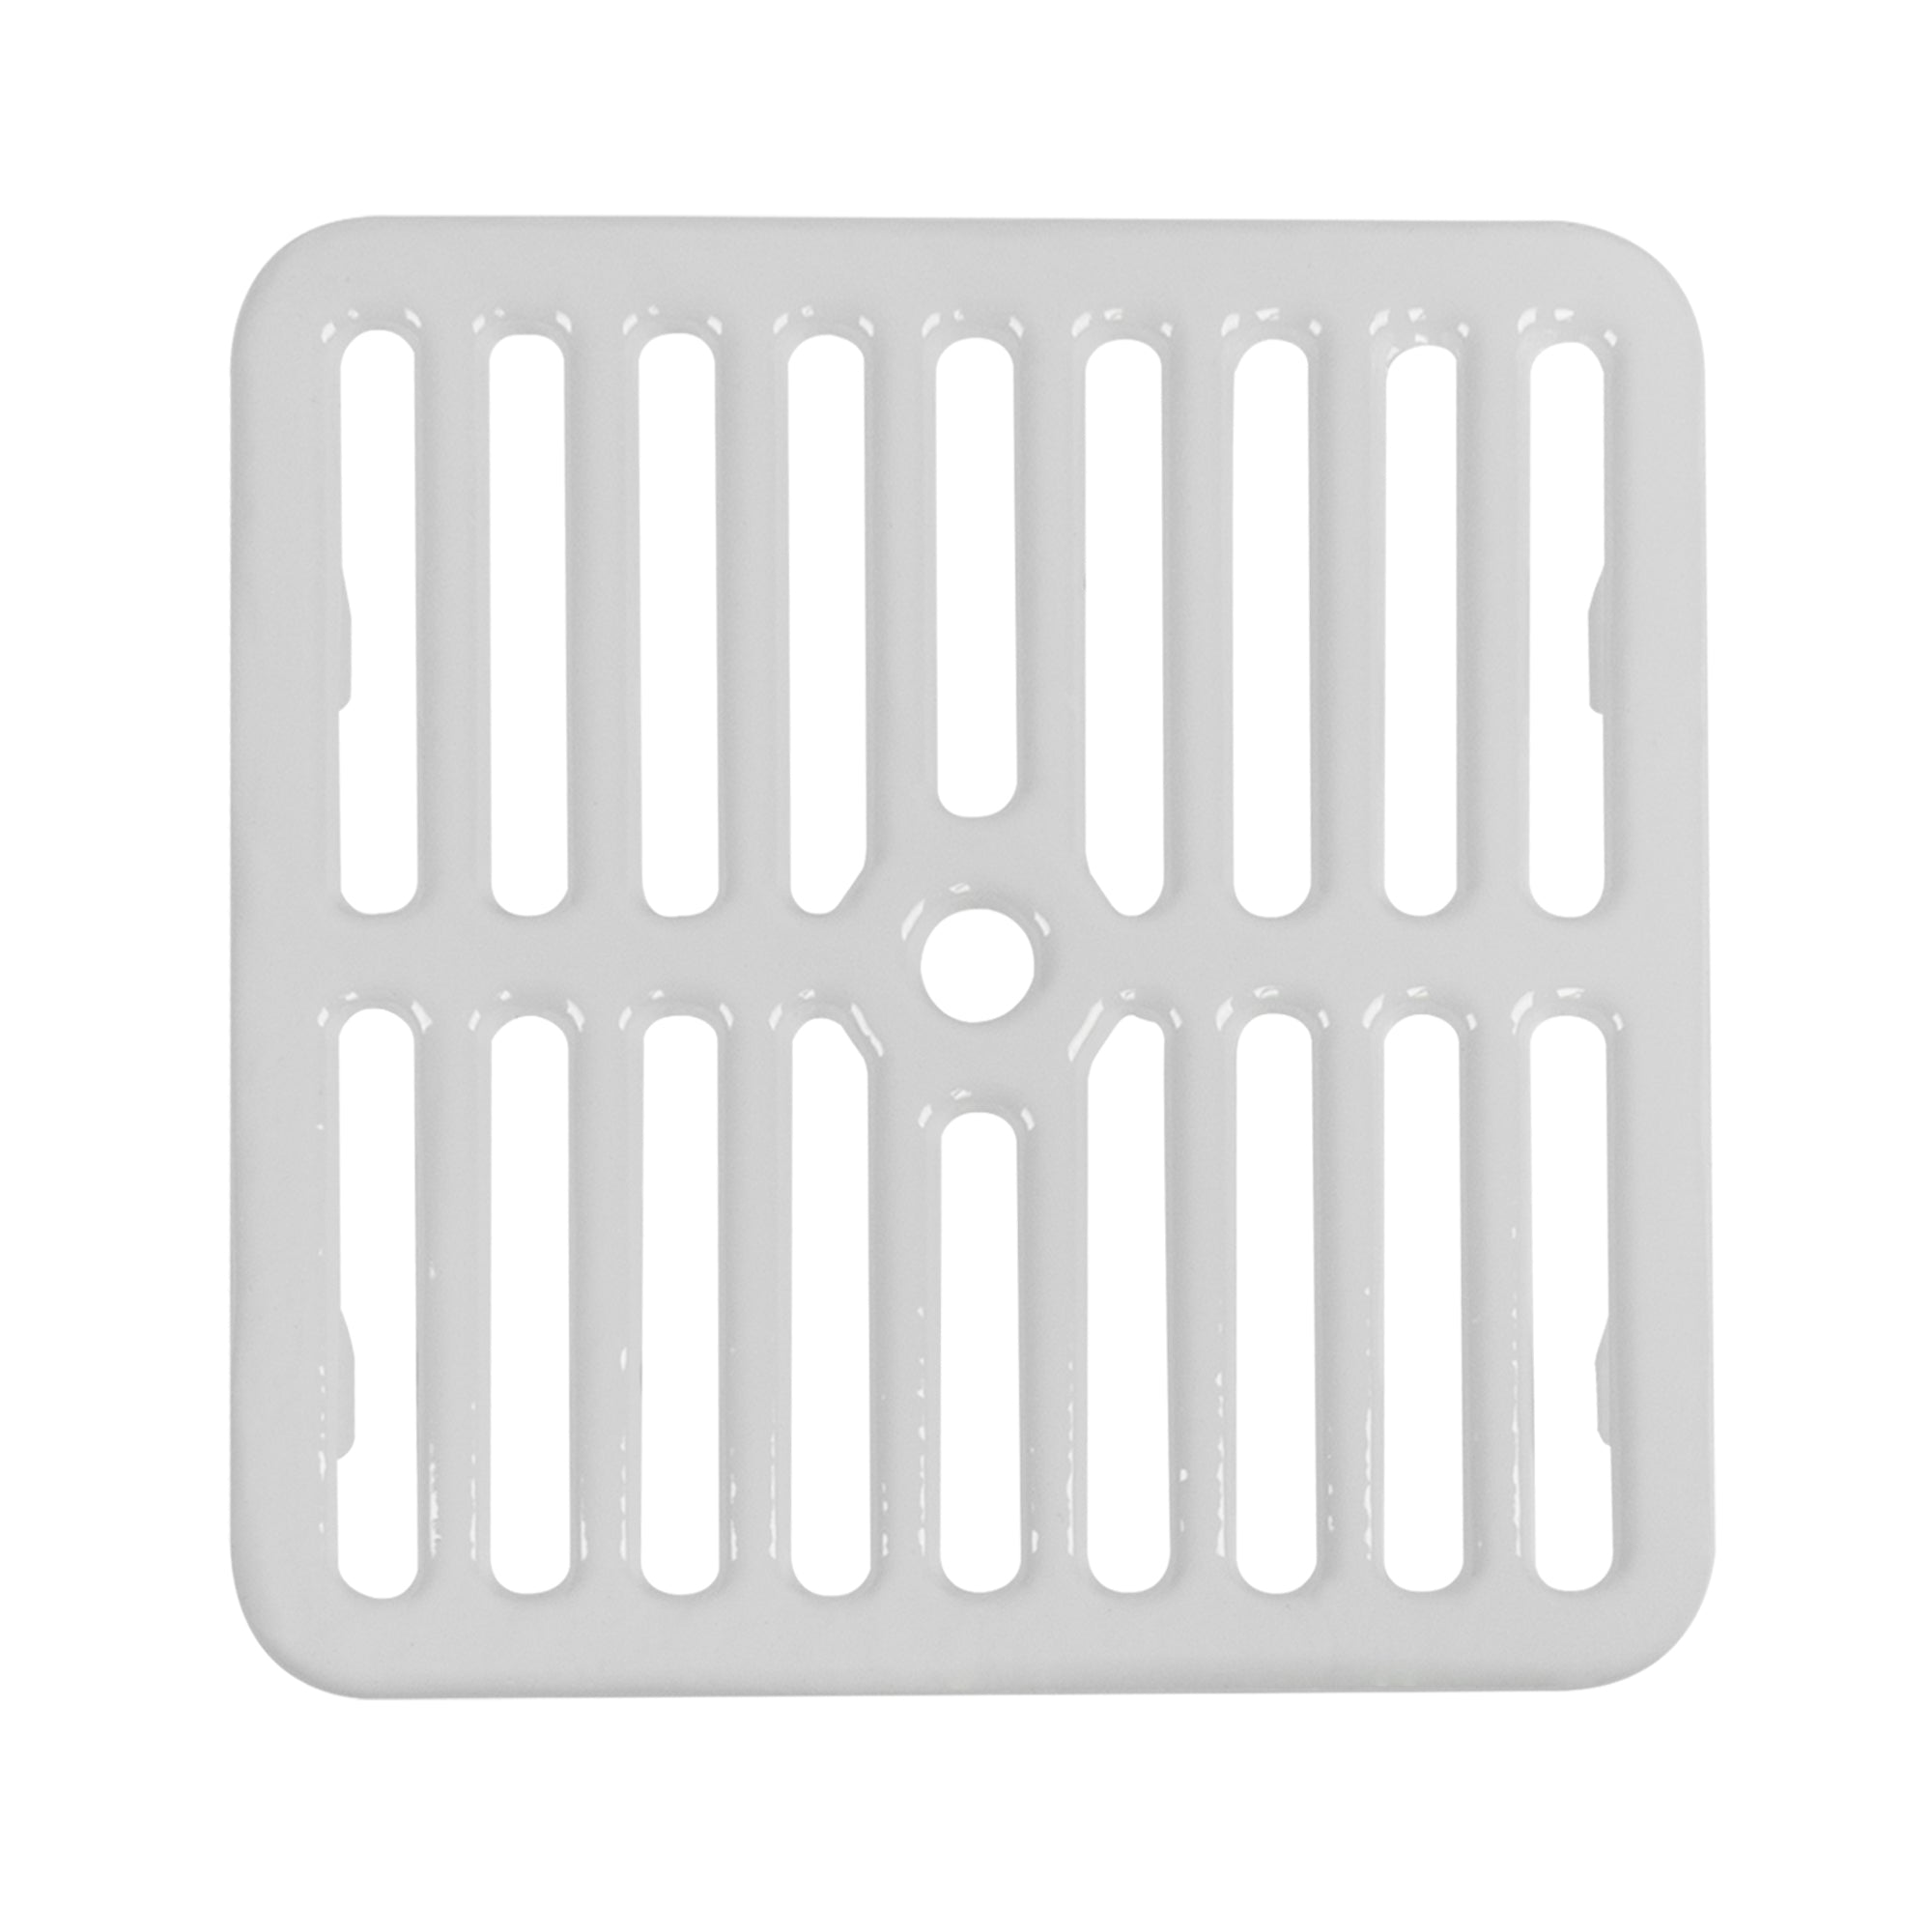 Leyso Cast Iron Porcelain Floor Sink Top Grate with Ceramic Surface FS-TF, 9-⅜” x 9-⅜” x 1-¼” - Perfect for Restaurant, Bar, Buffet (Full Size)